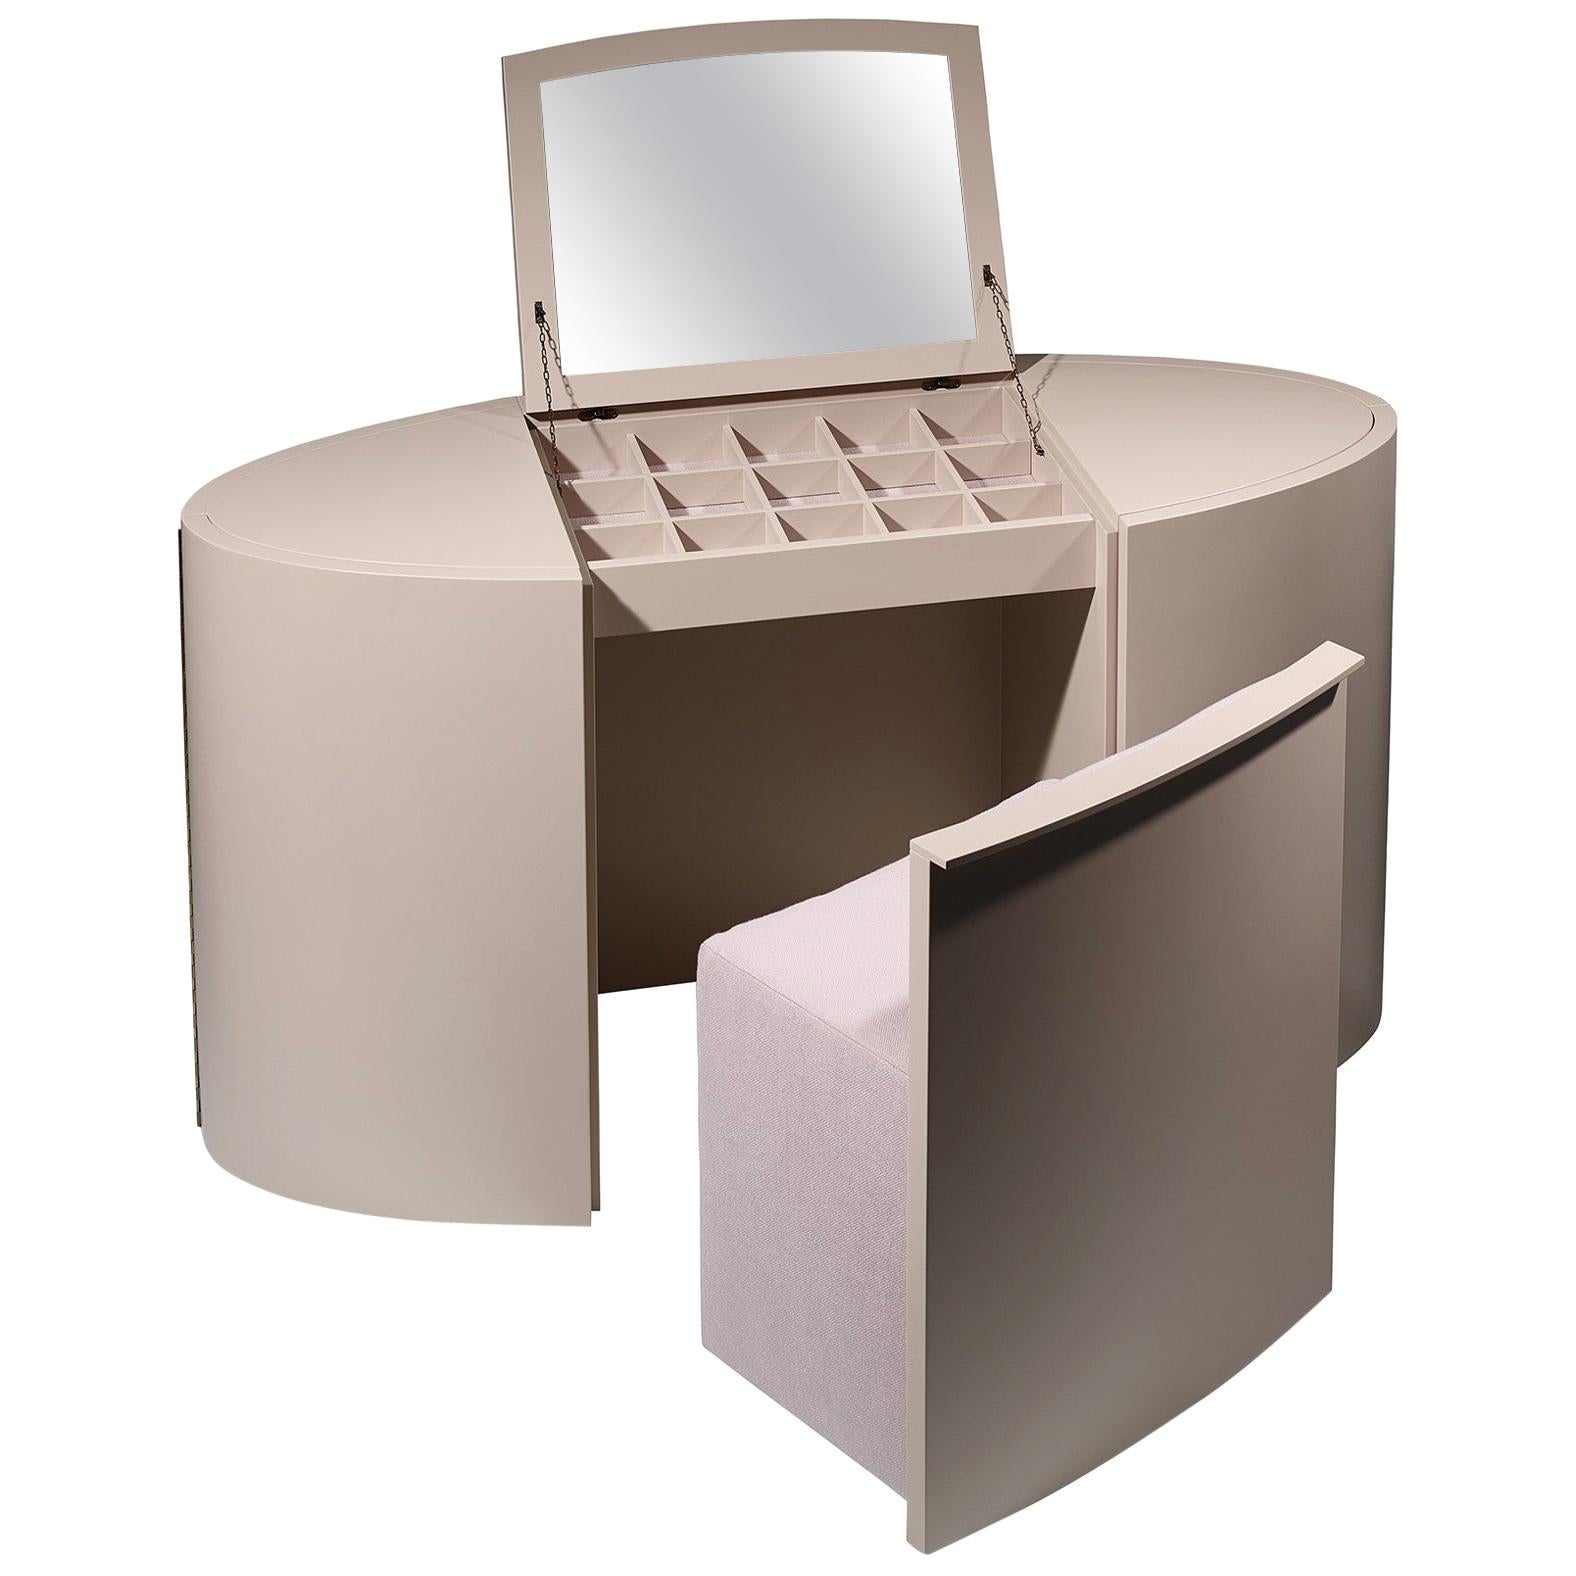 Alice Contemporary and Customizable Dressing Table by Luísa Peixoto